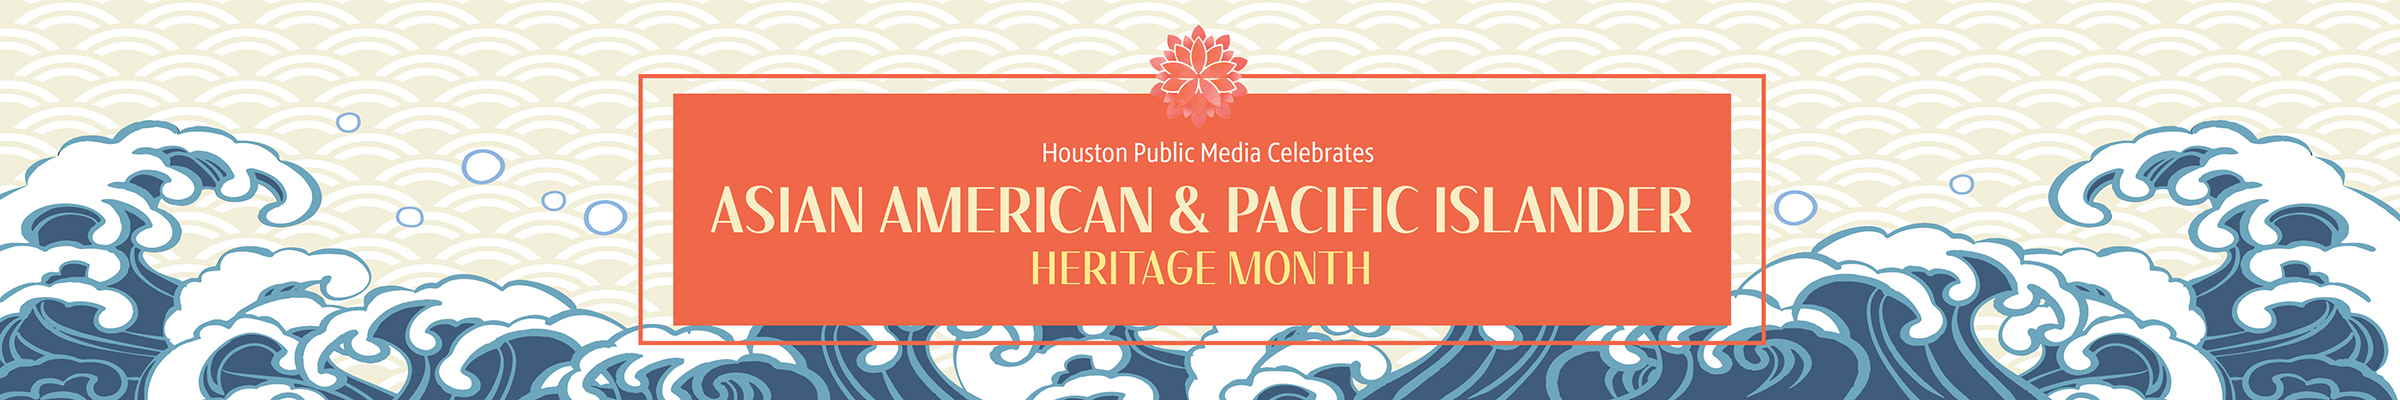 Houston Public Media Celebrates Asian American Pacific Islander Heritage Month page banner